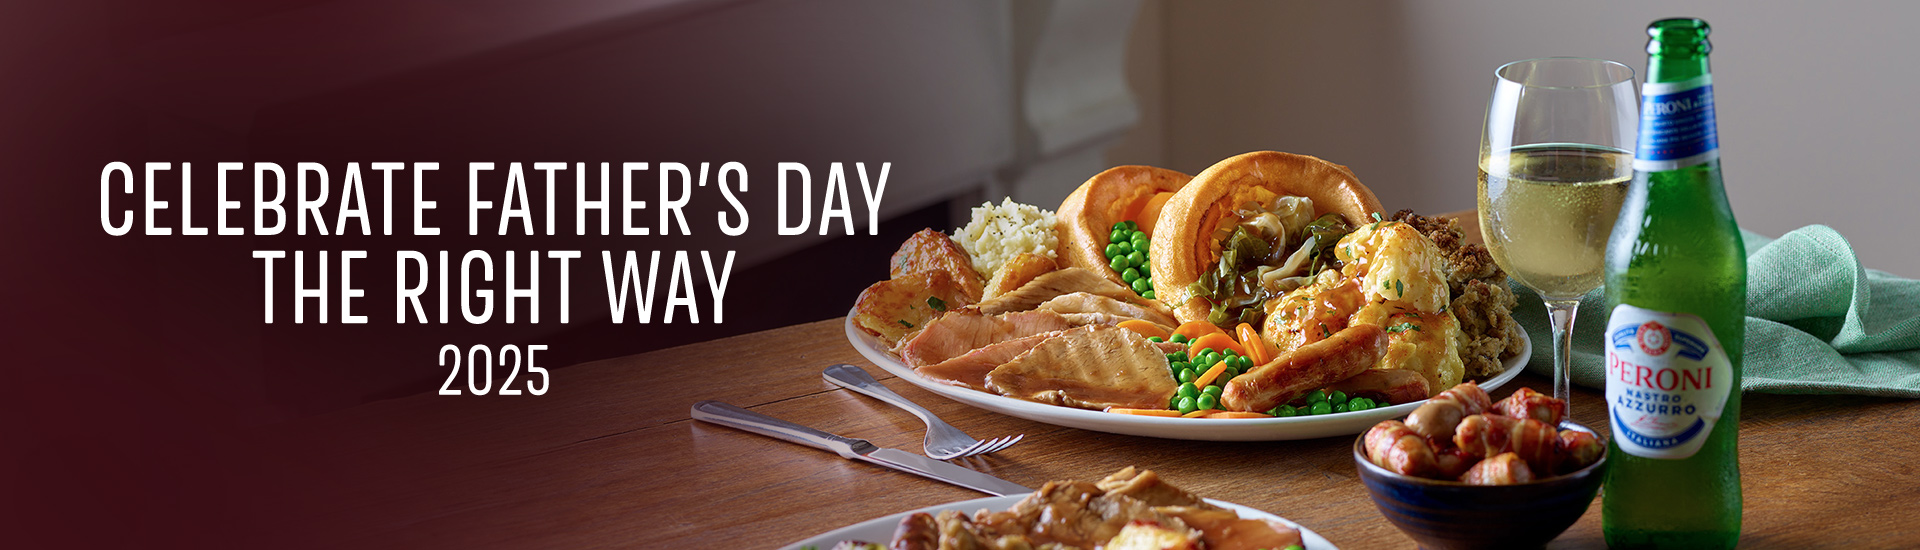 Father’s day carvery in London